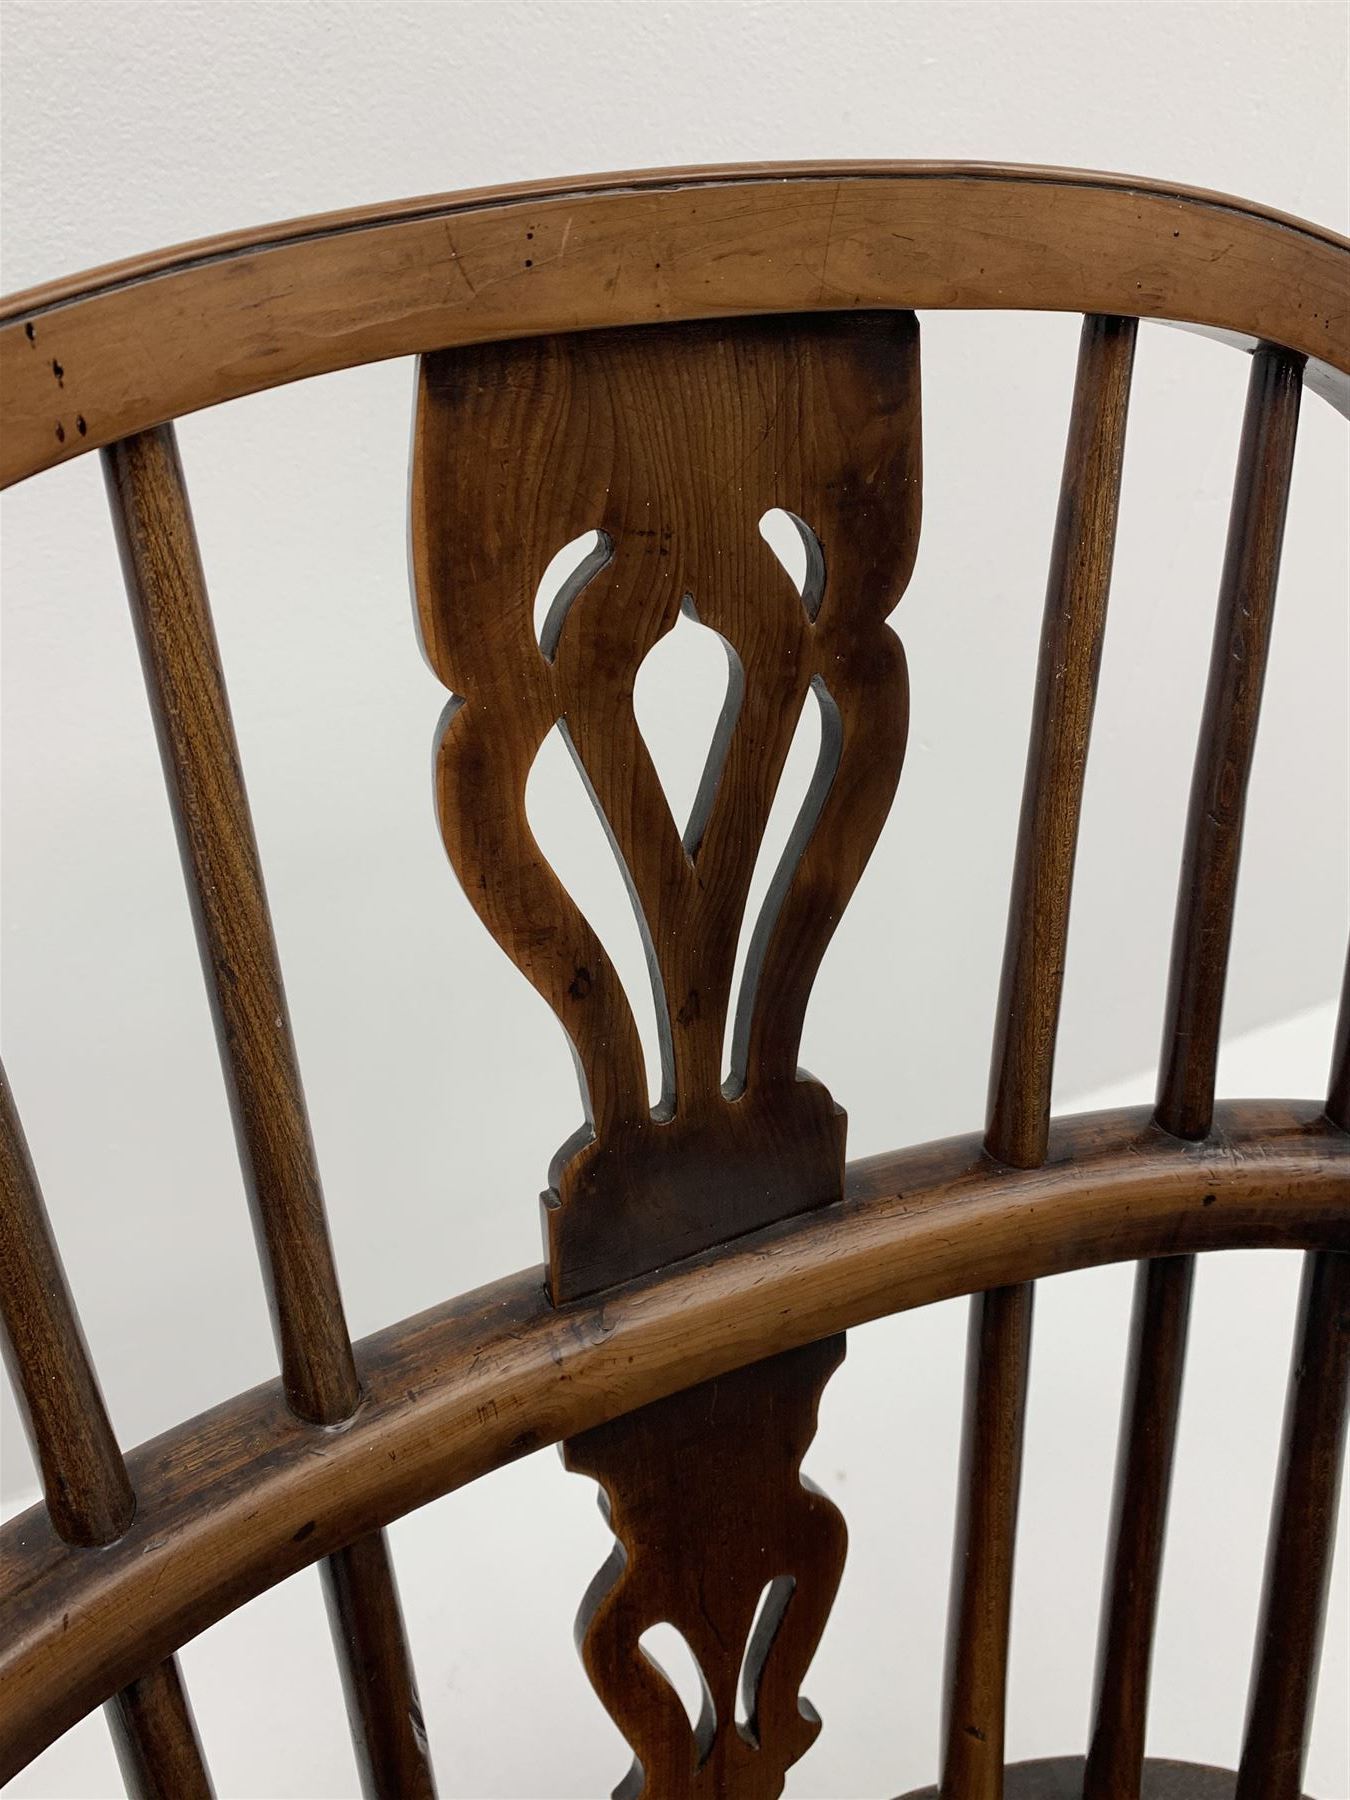 Early 19th century yew wood and elm Windsor armchair - Image 4 of 8